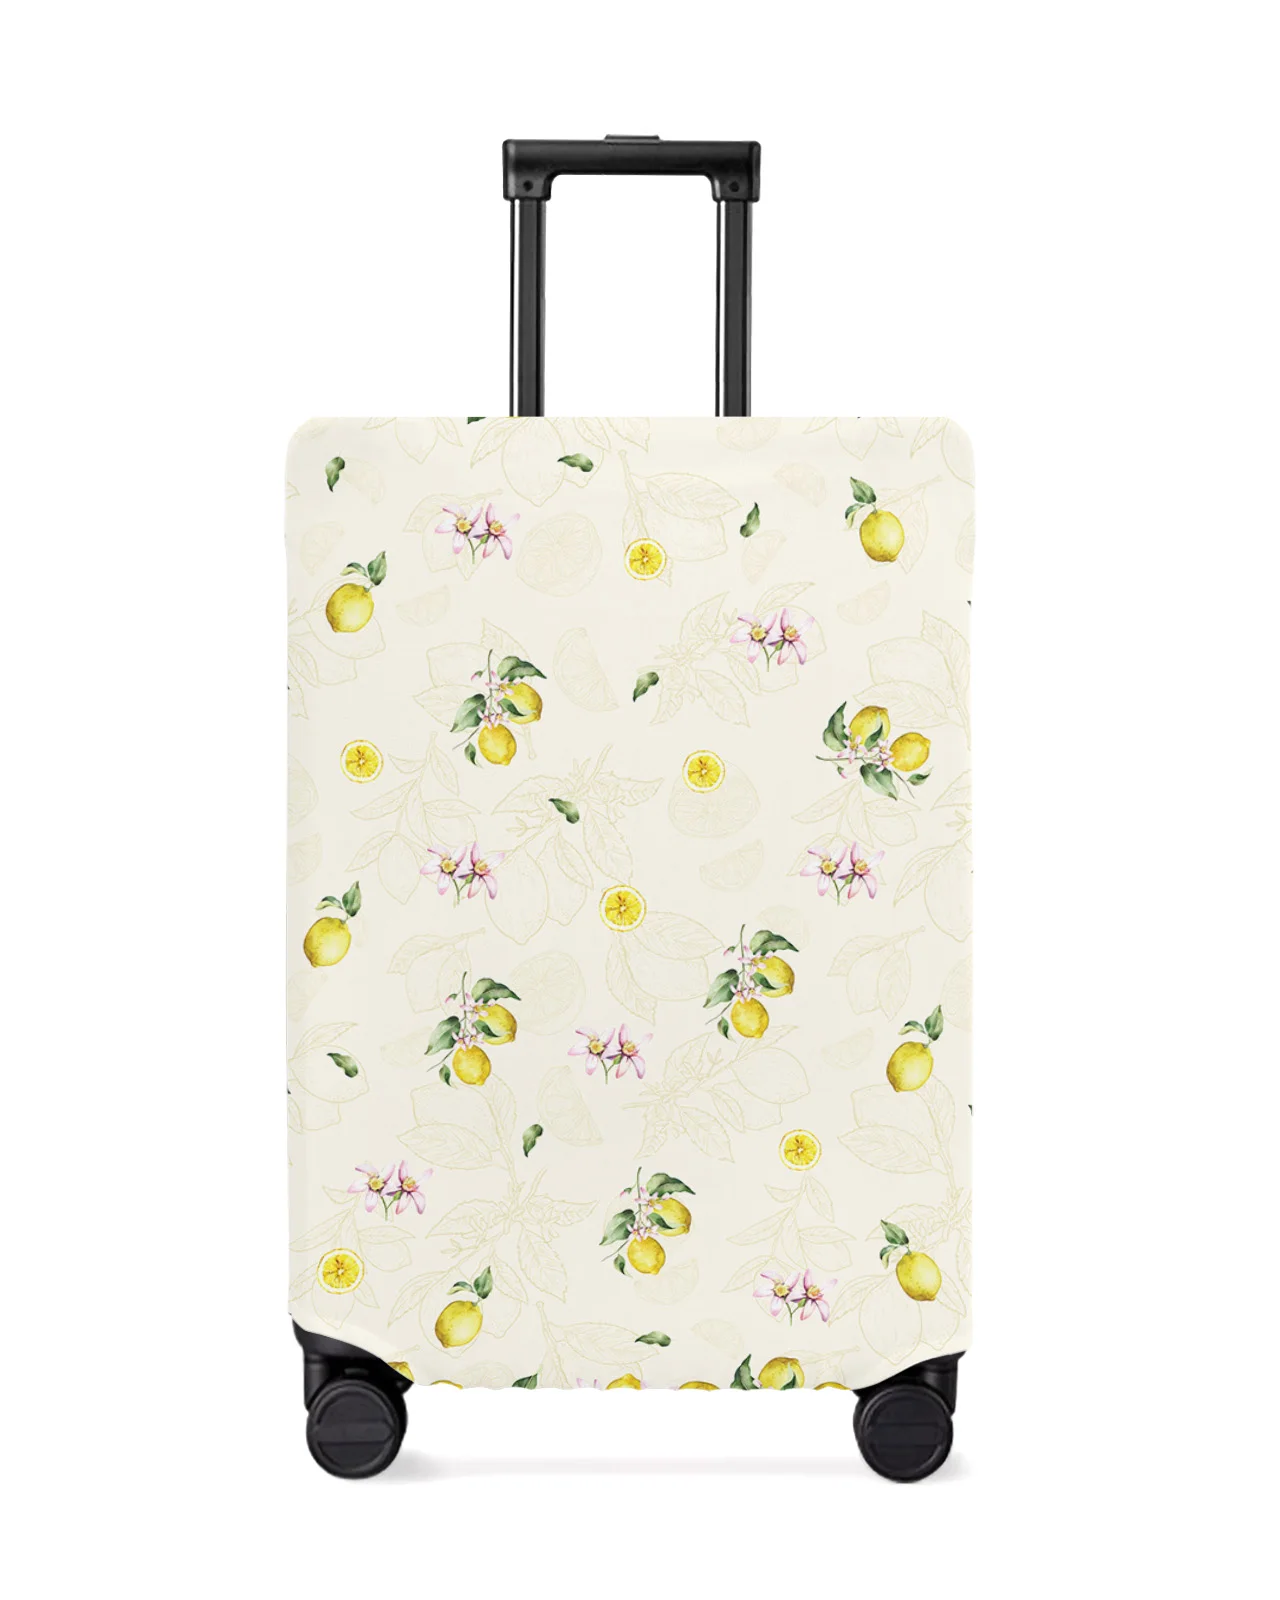 

Watercolor Lemon Pink Flower Travel Luggage Cover Elastic Baggage Cover Suitcase Case Dust Cover 18-32 Inch Travel Accessories